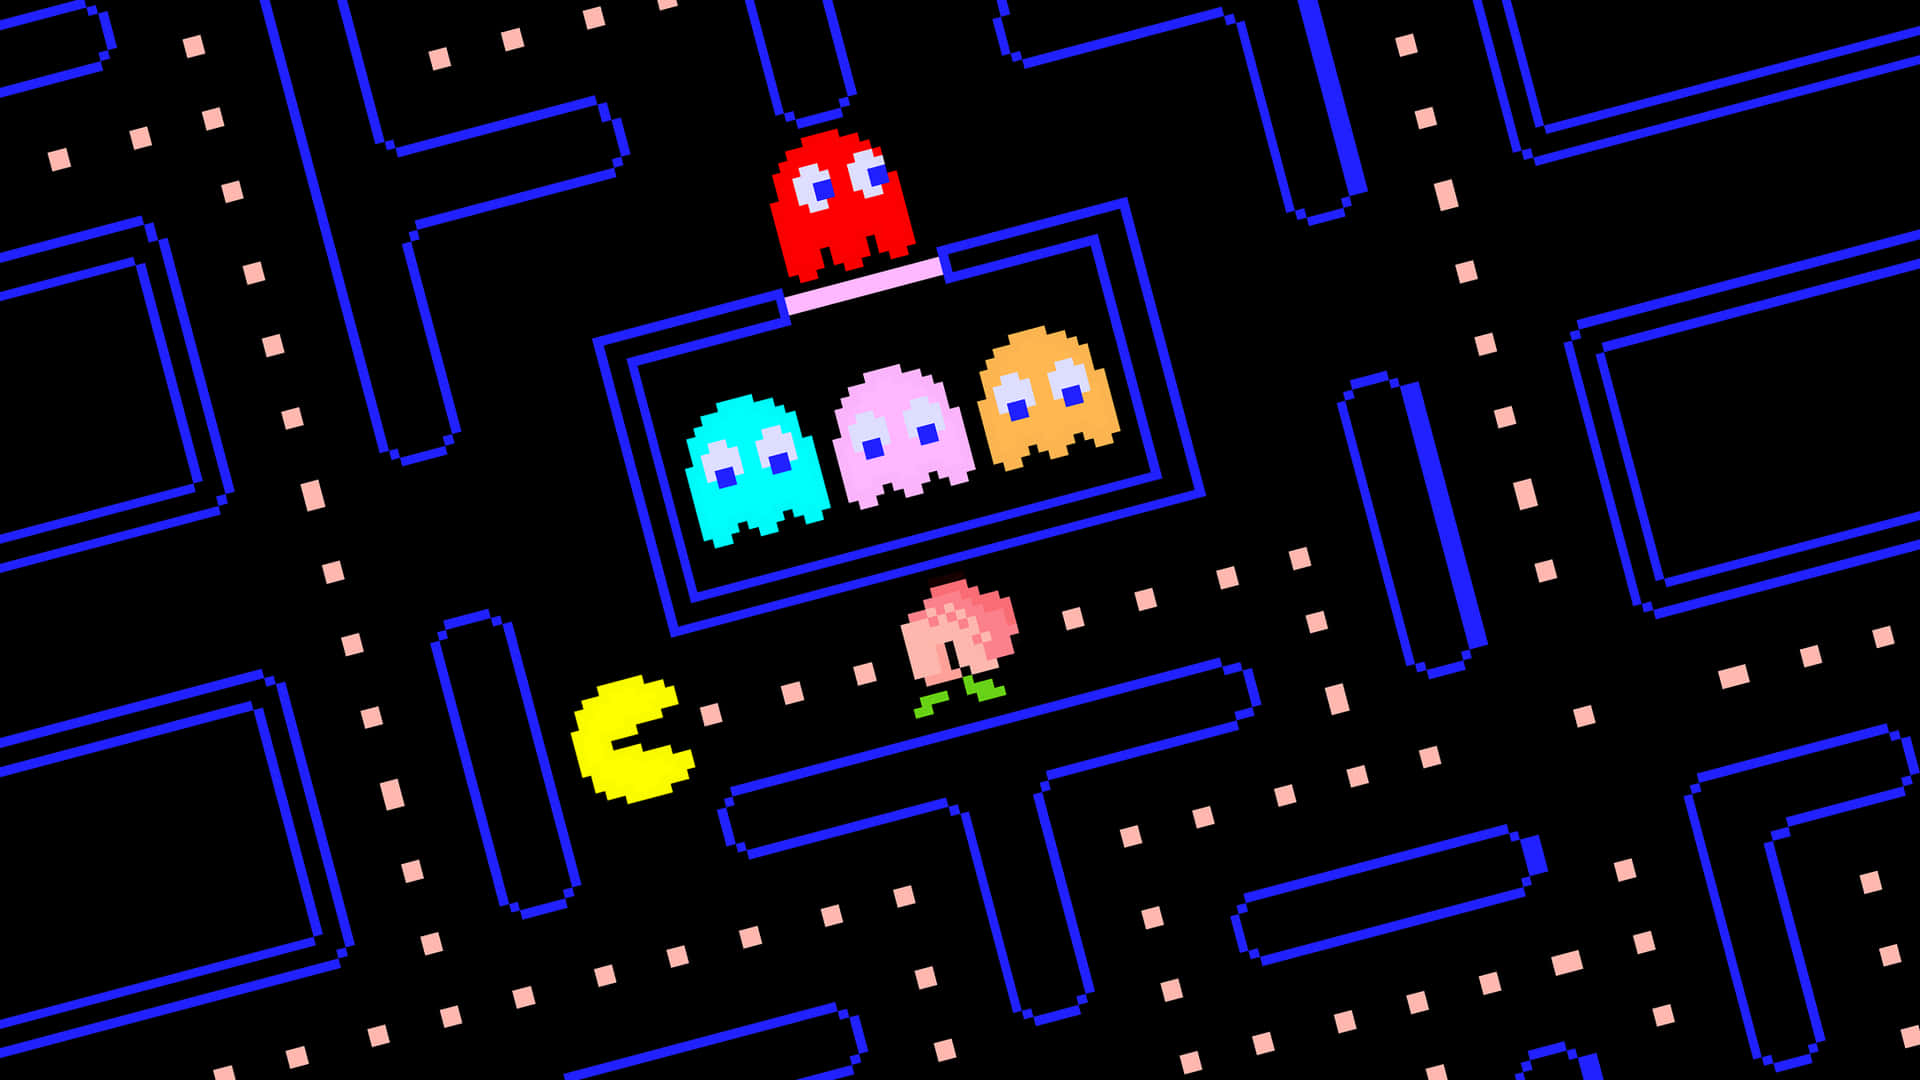 Iconic Pac-Man Game in Action